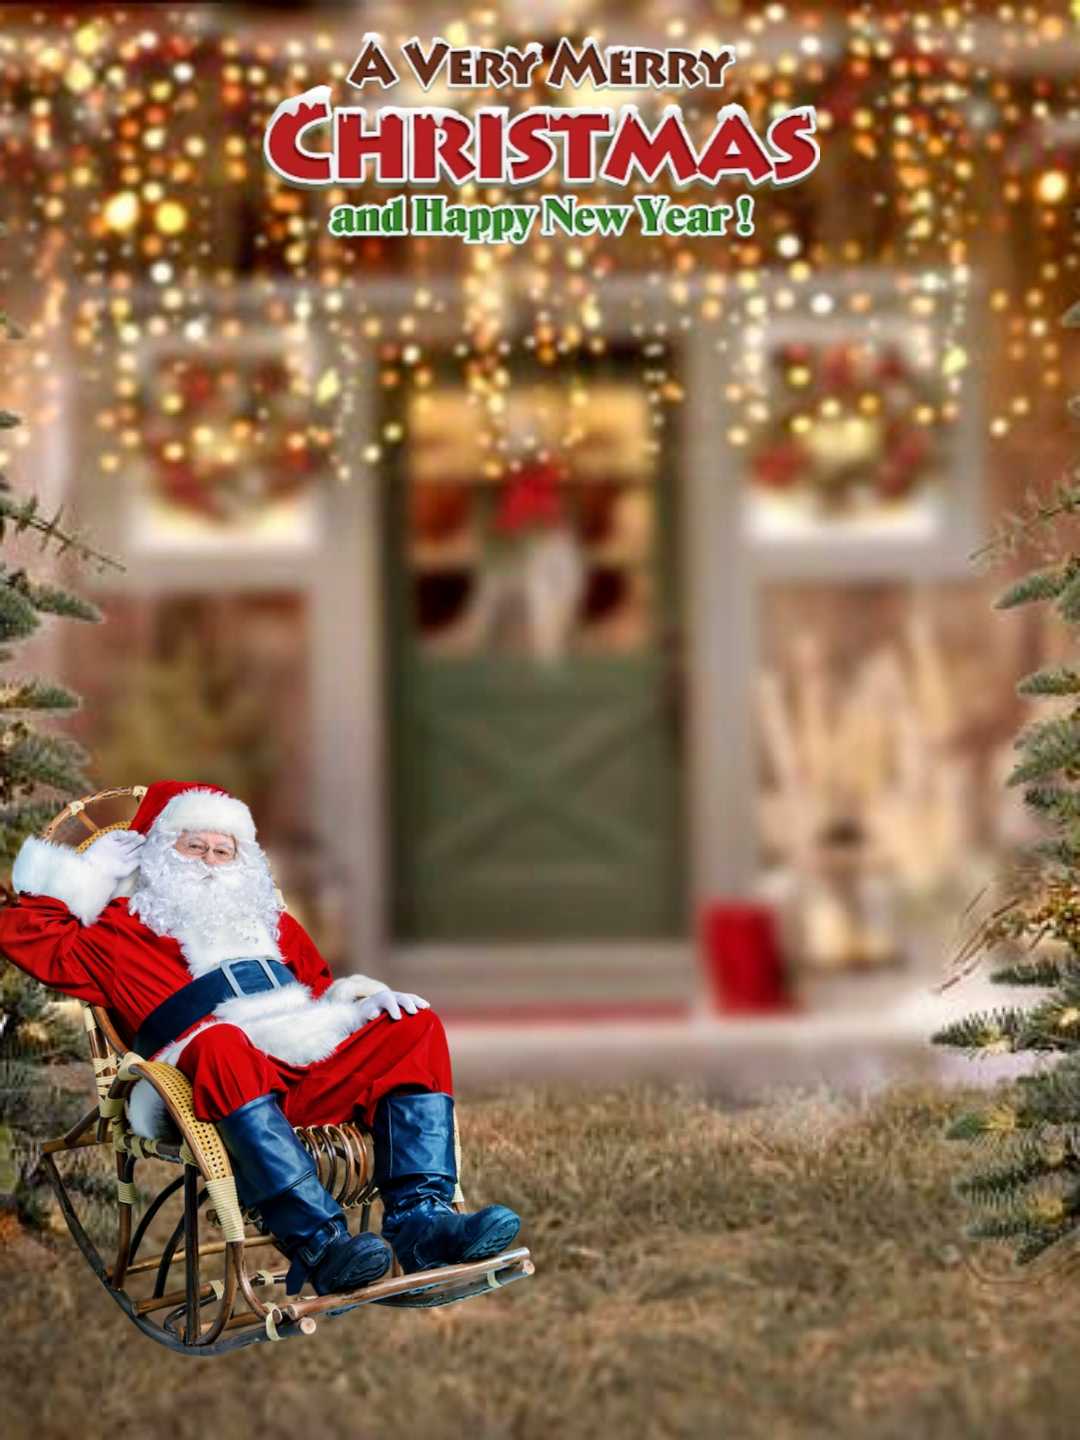 Christmas background image with santa clouse